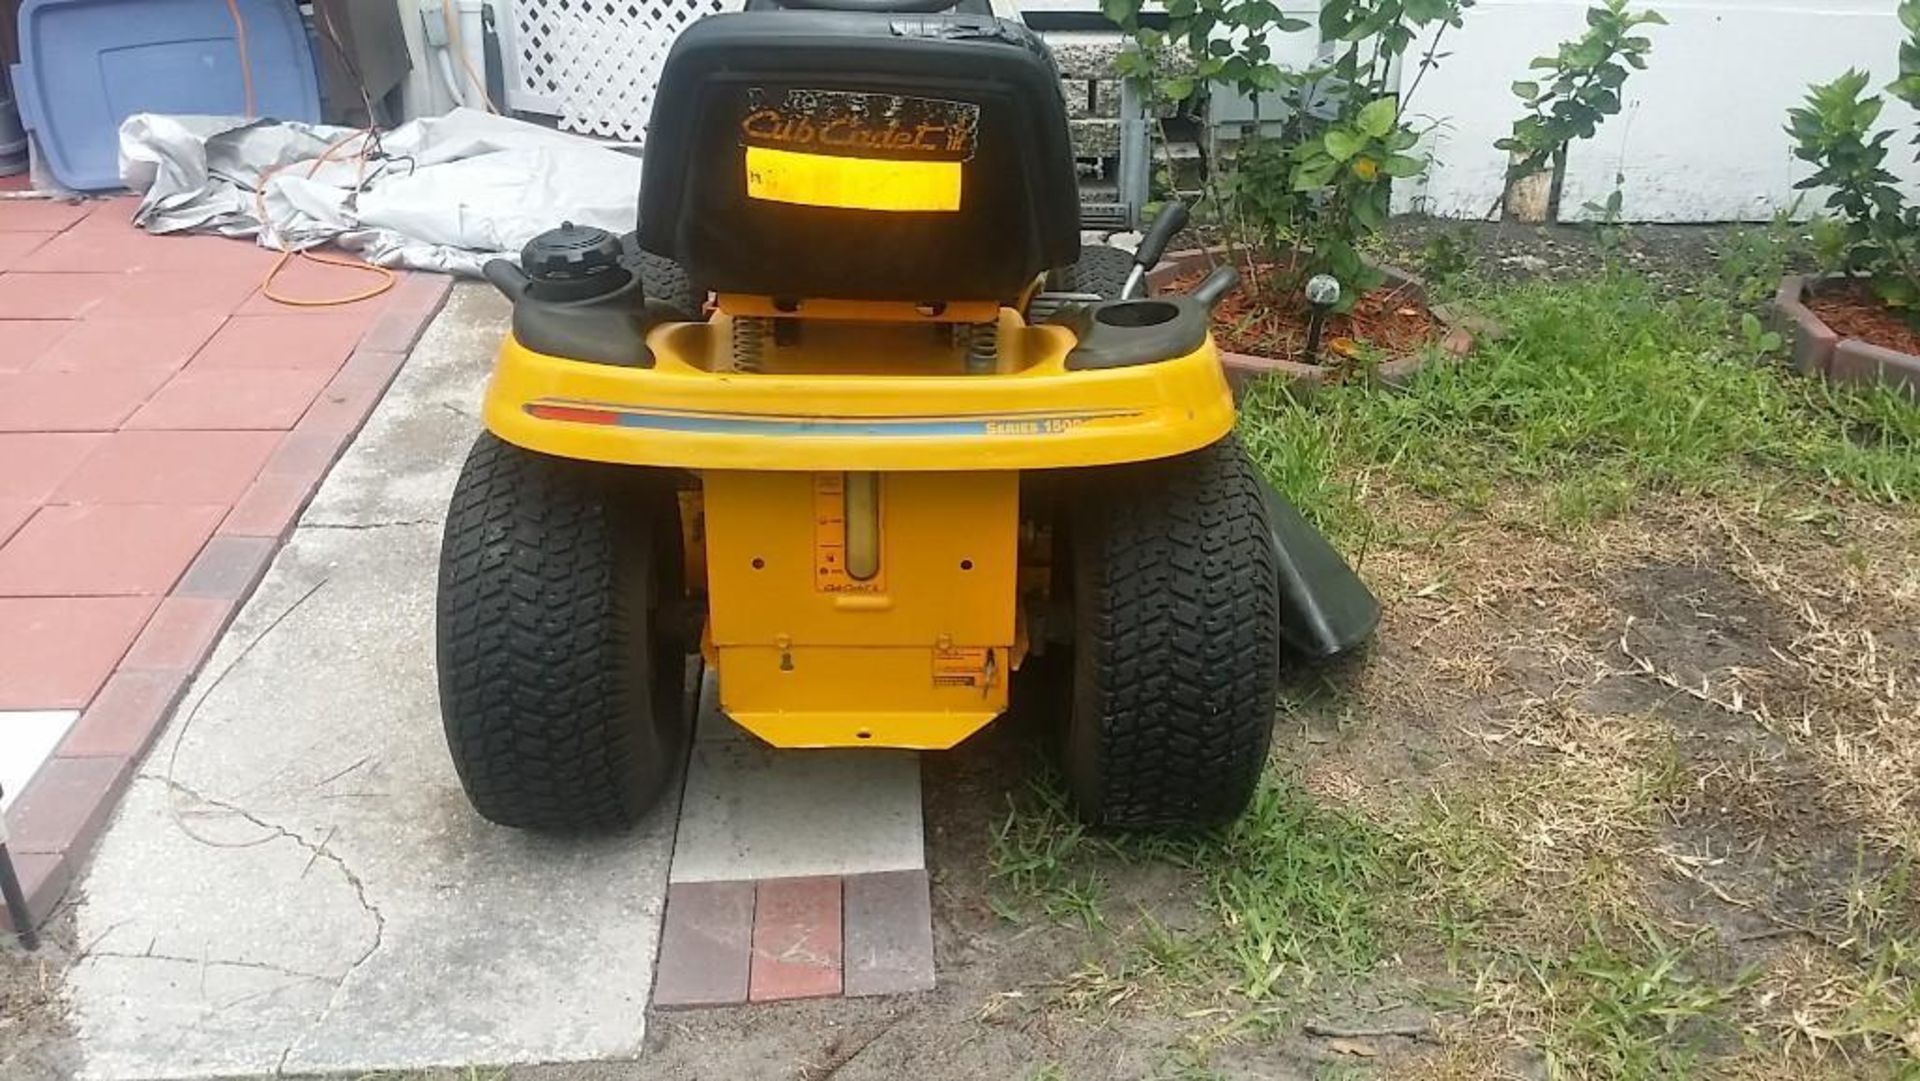 CUB CADET 1517 MOWER, 279.9 HOURS SHOWING, RUNS - Image 5 of 18